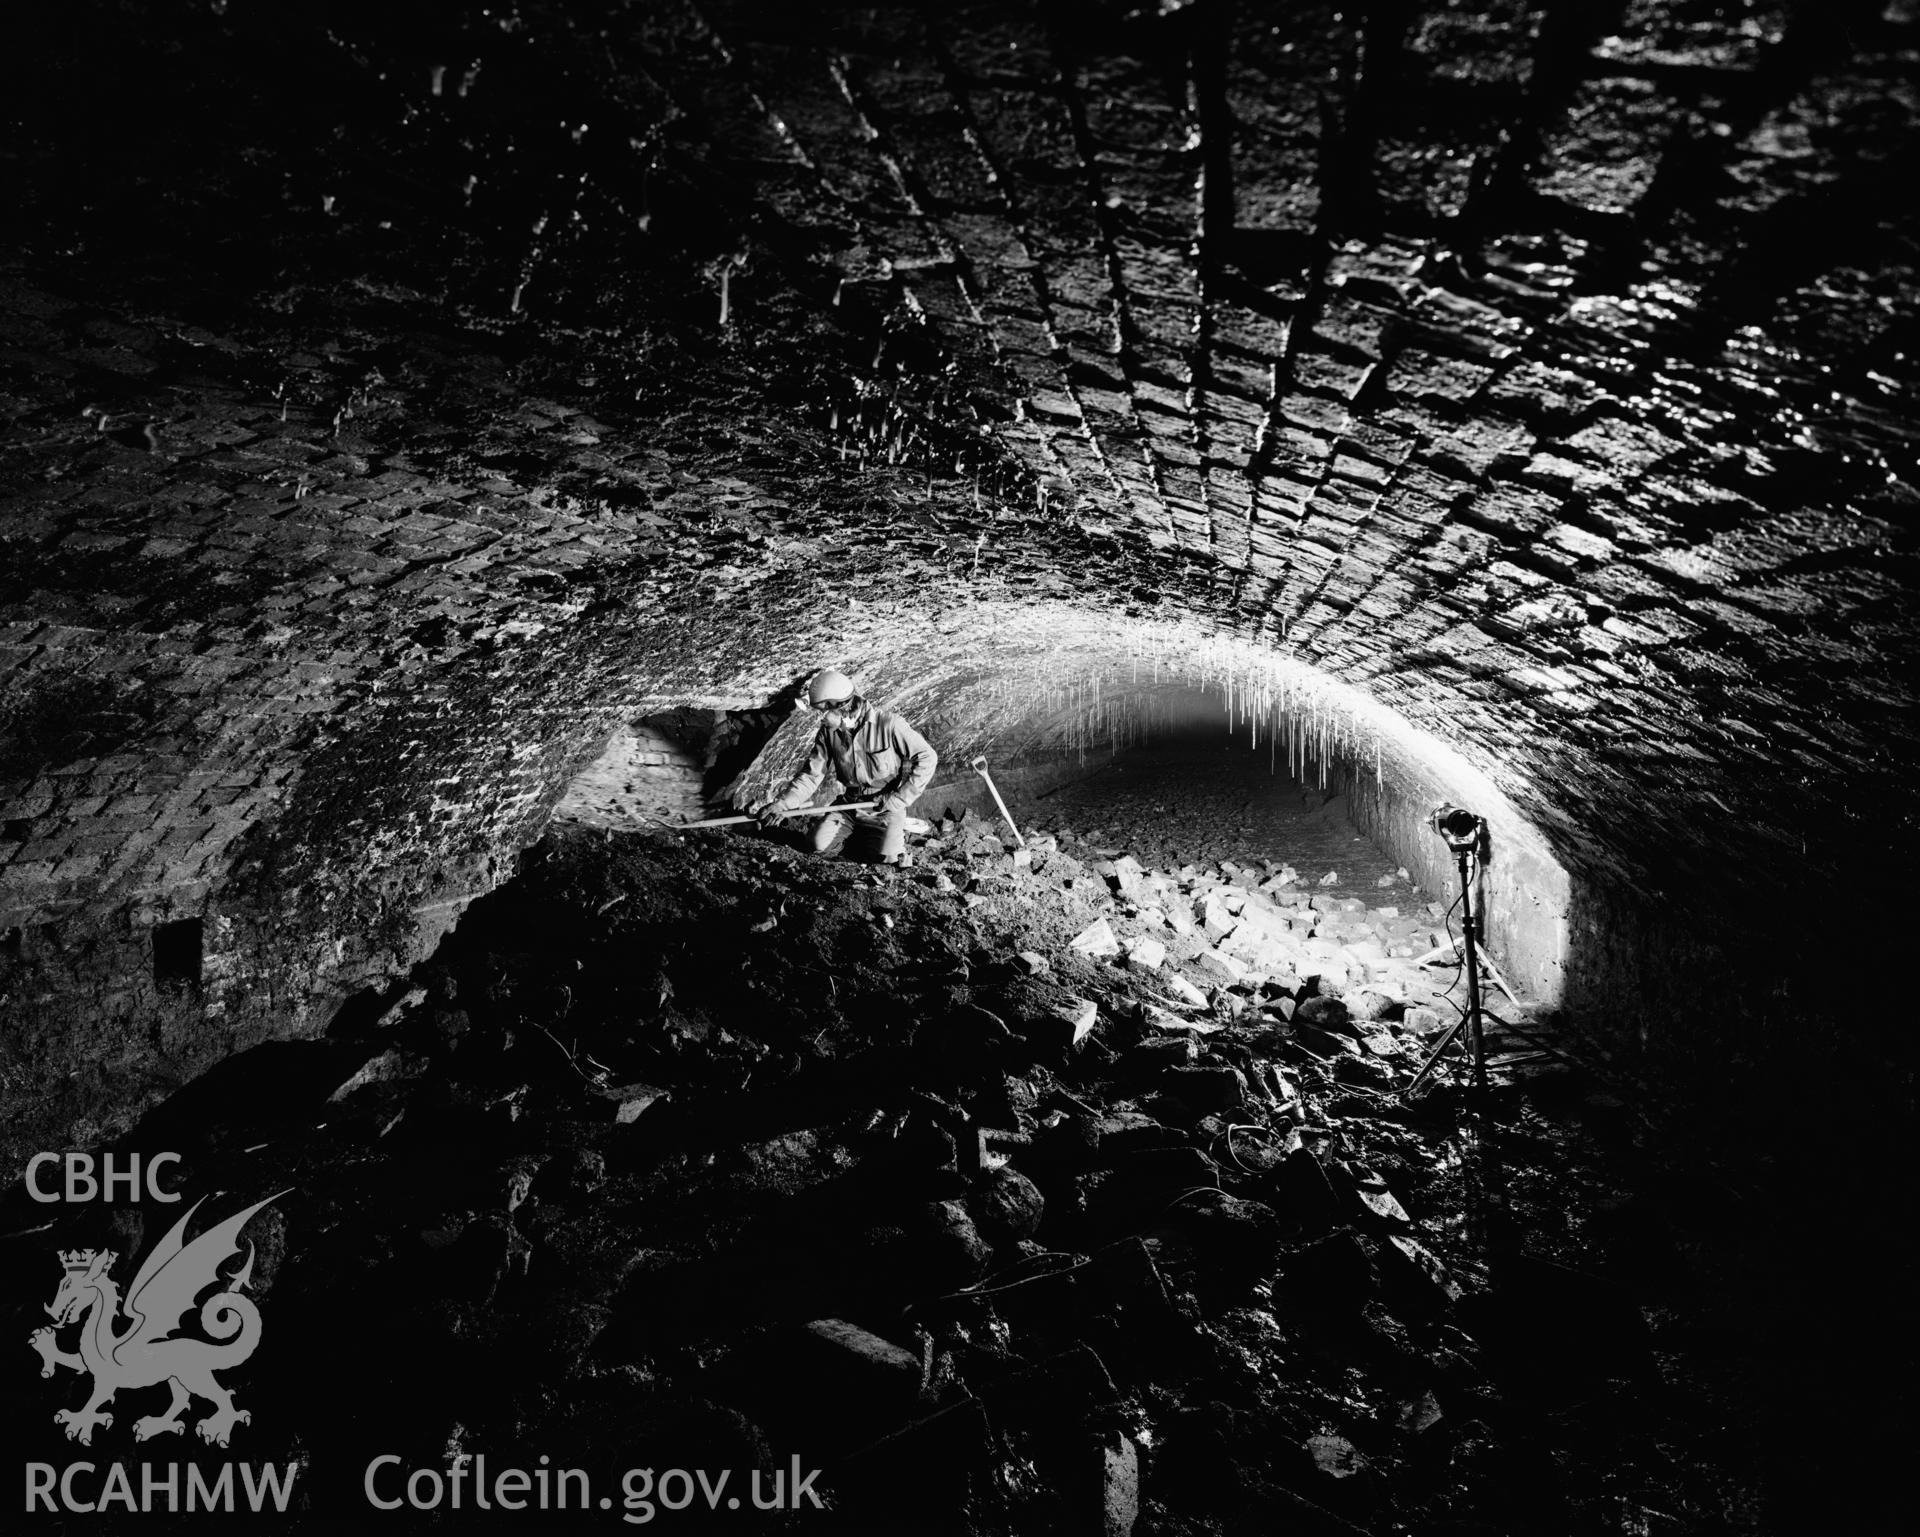 White Rock Tunnel, Smith's Canal Swansea; digitised copy of an RCAHMW black and white negative showing Brian Malaws inside the tunnel, this image has been used in a number of exhibitions and publications including Copperopolis by Stephen Hughes.